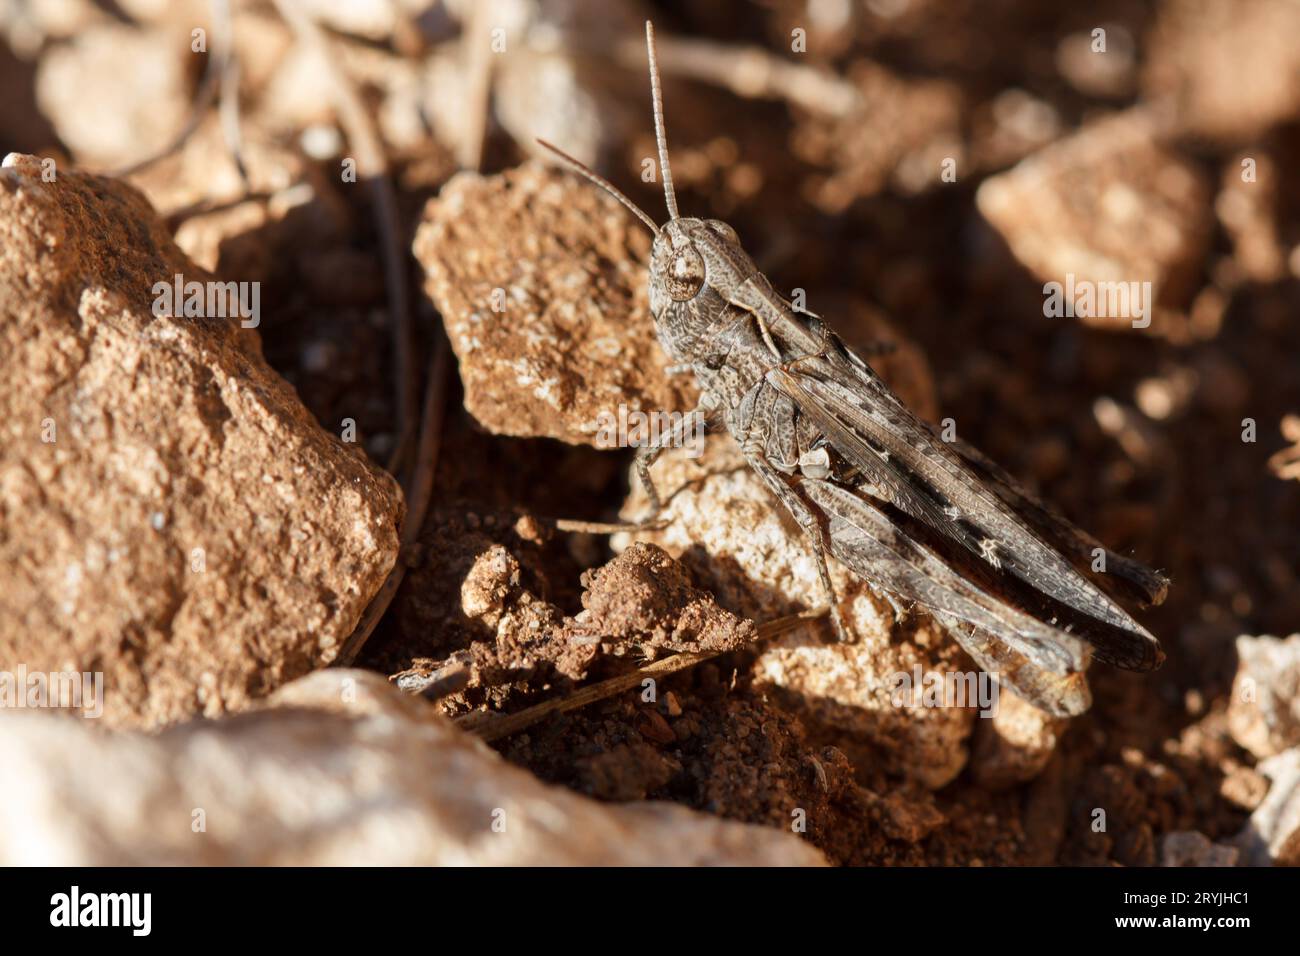 Grasshopper Oedipodinae camouflaged among the ground soil in the Mariola mountain range of Alcoy, Spain Stock Photo